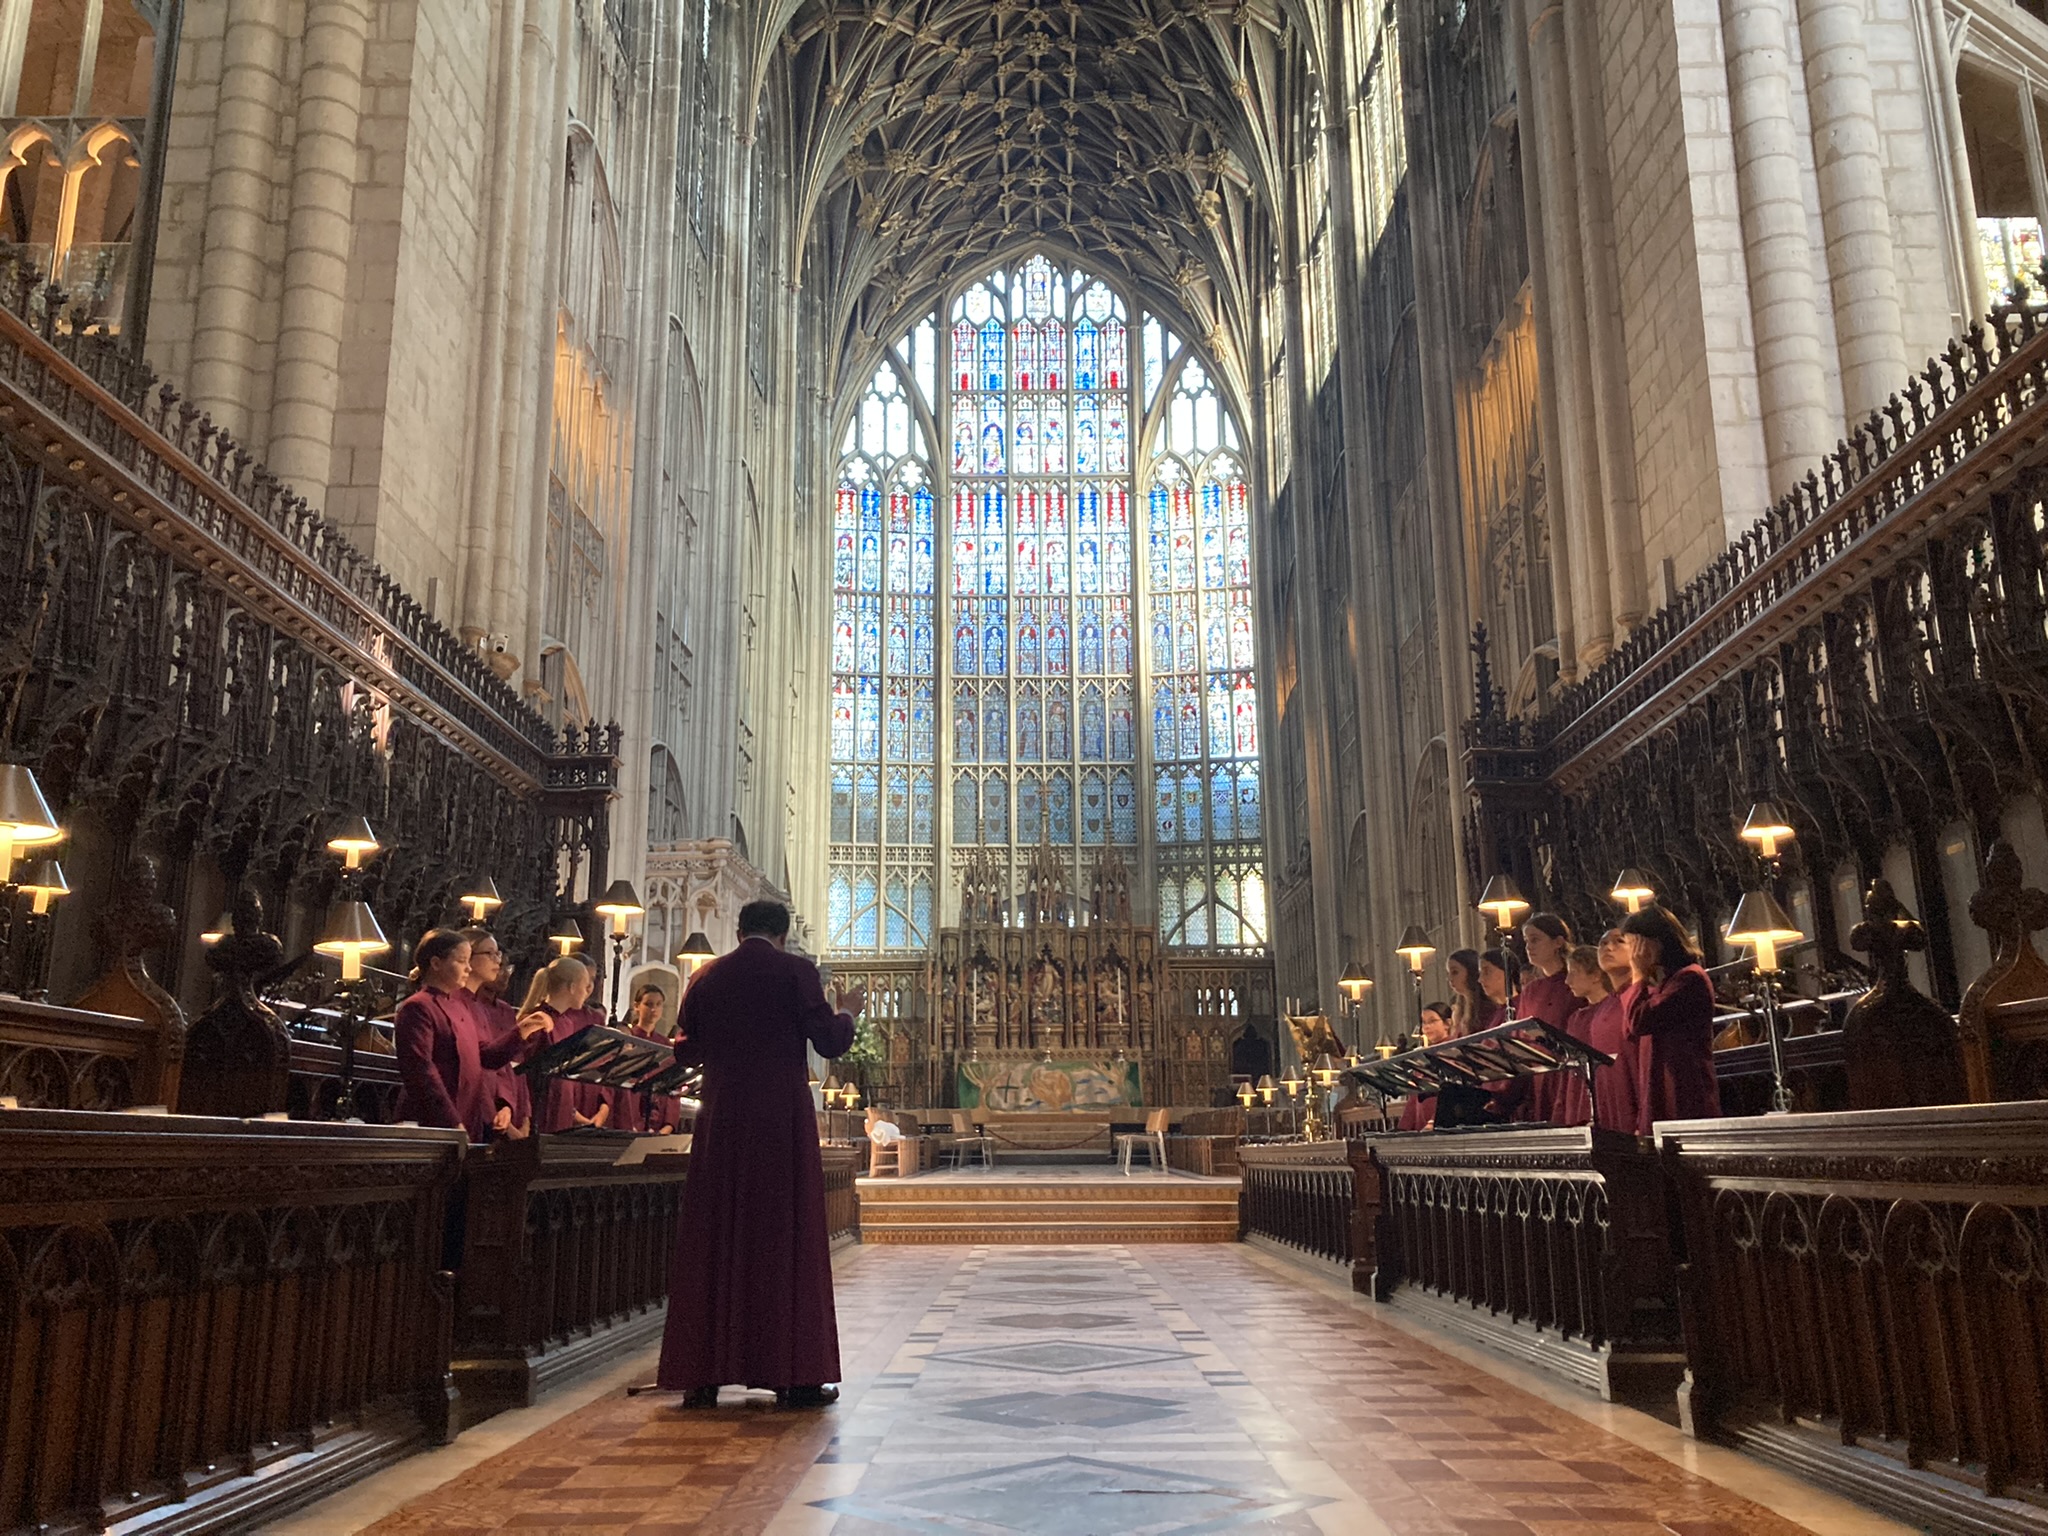 The choristers sing in their burgundy cassocks in the stalls in front of the large blue and red glass window of of Gloucester Cathedral